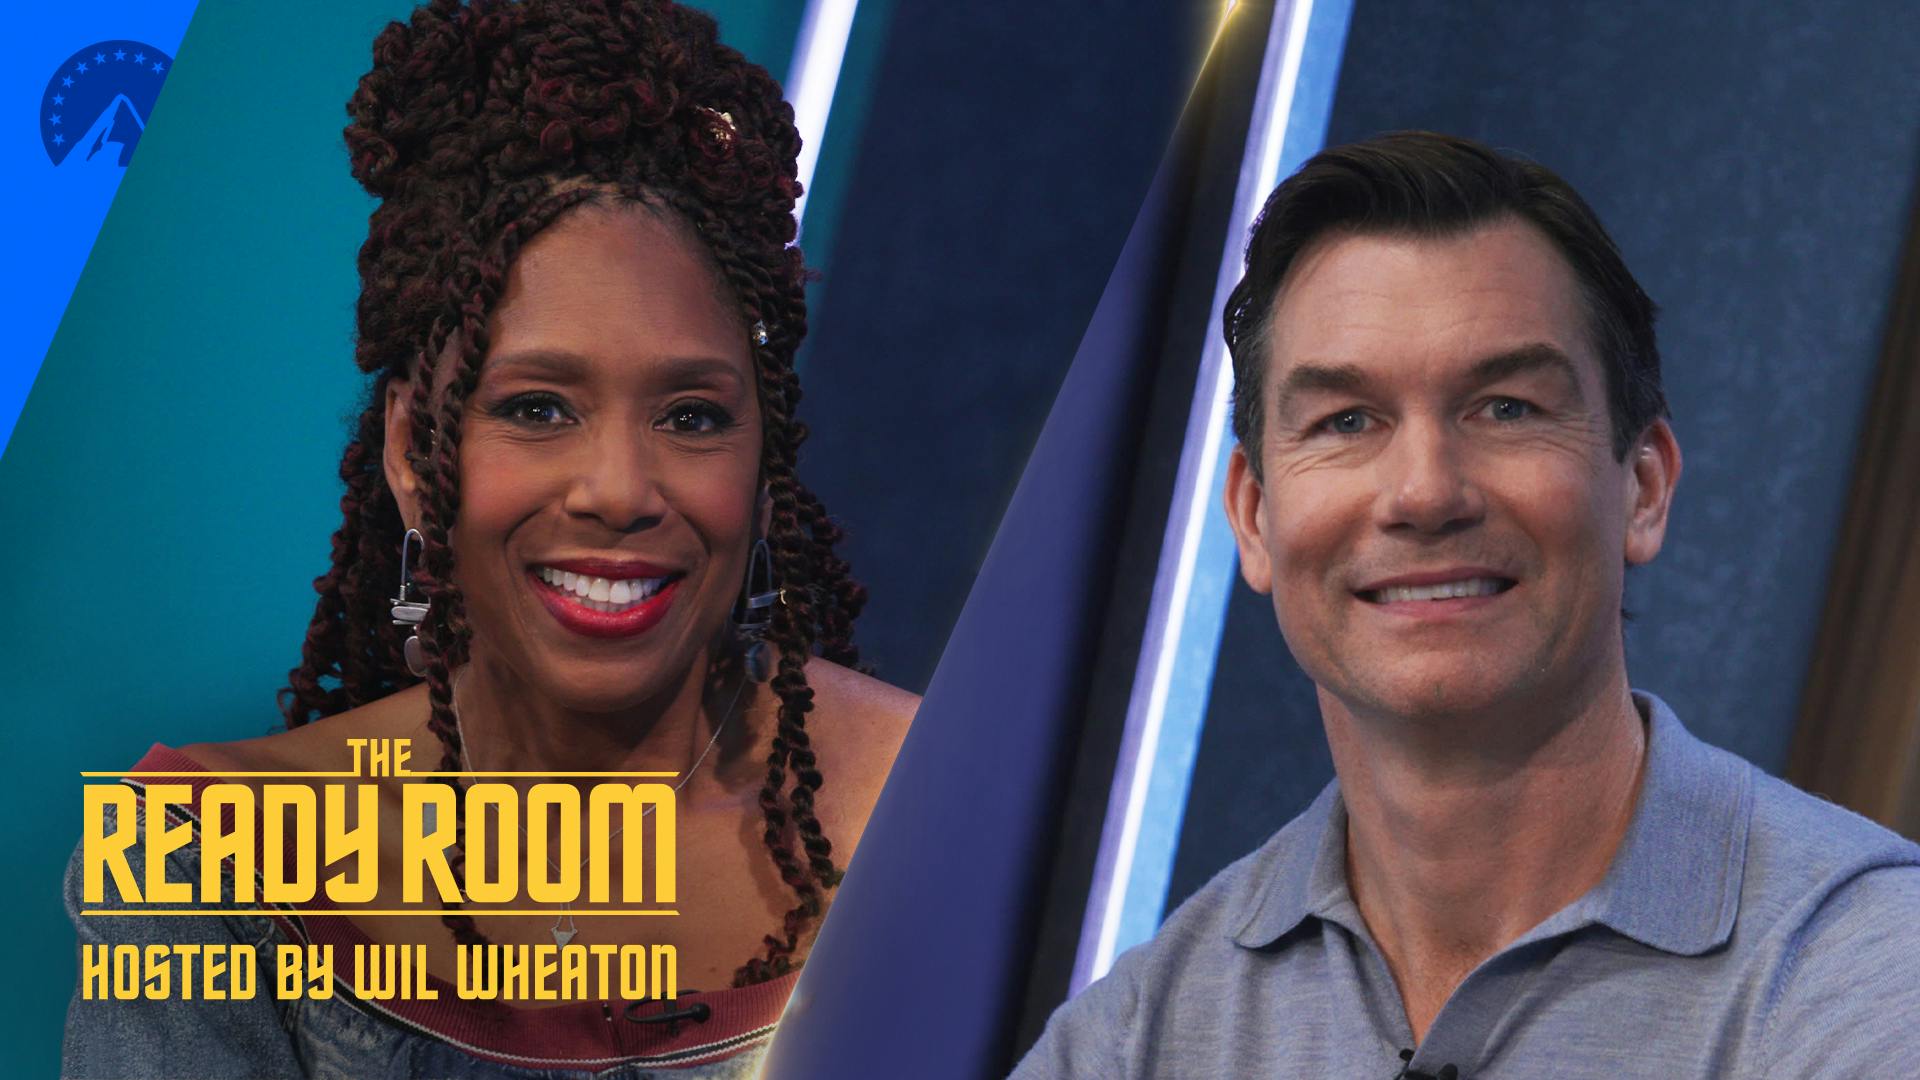 Dawnn Lewis and Jerry O'Connell on set of The Ready Room to talk Season 4 of Star Trek: Lower Decks